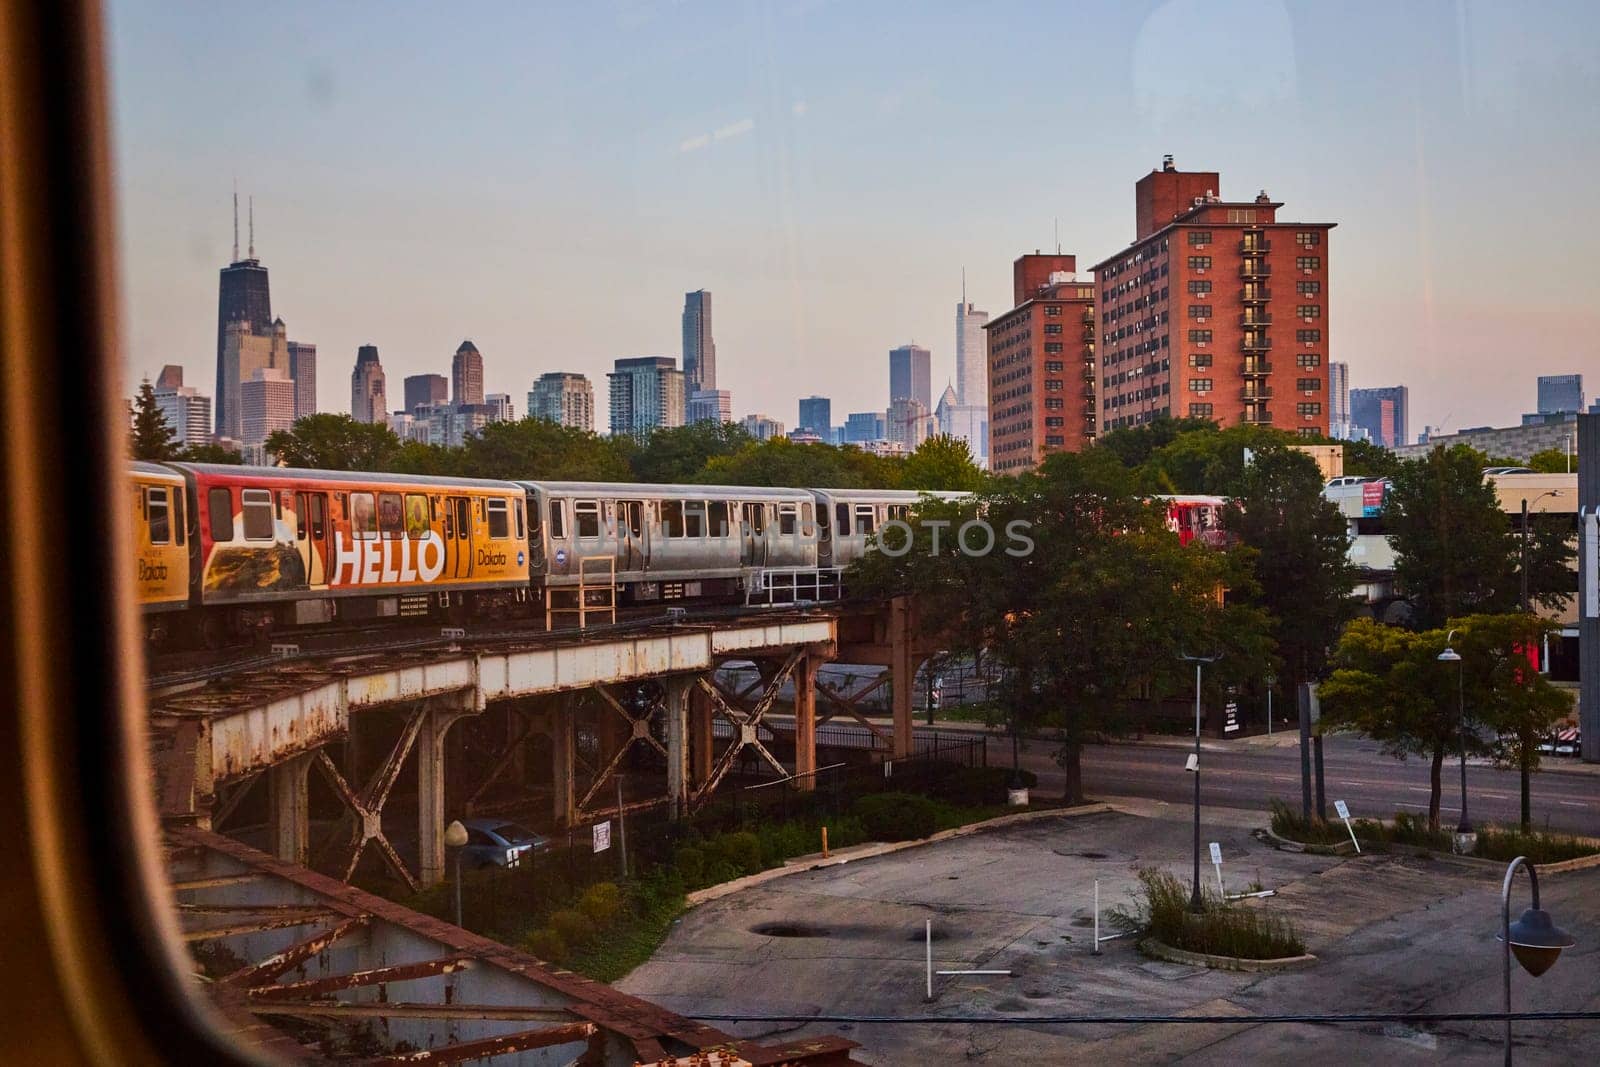 Train on raised track curving beside empty parking lot with Chicago skyscraper buildings in distance by njproductions